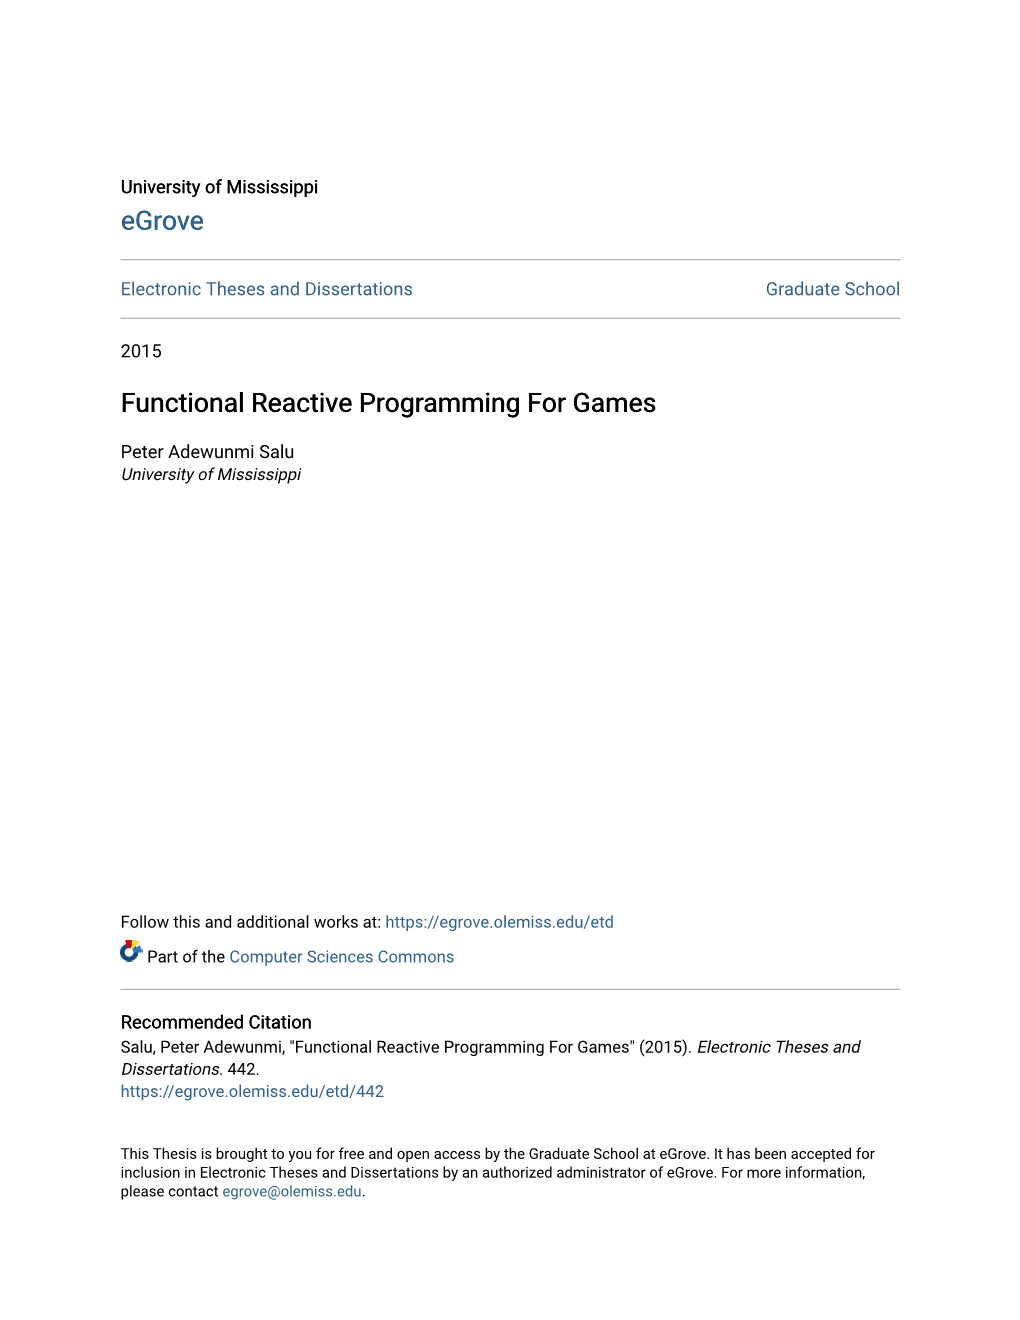 Functional Reactive Programming for Games